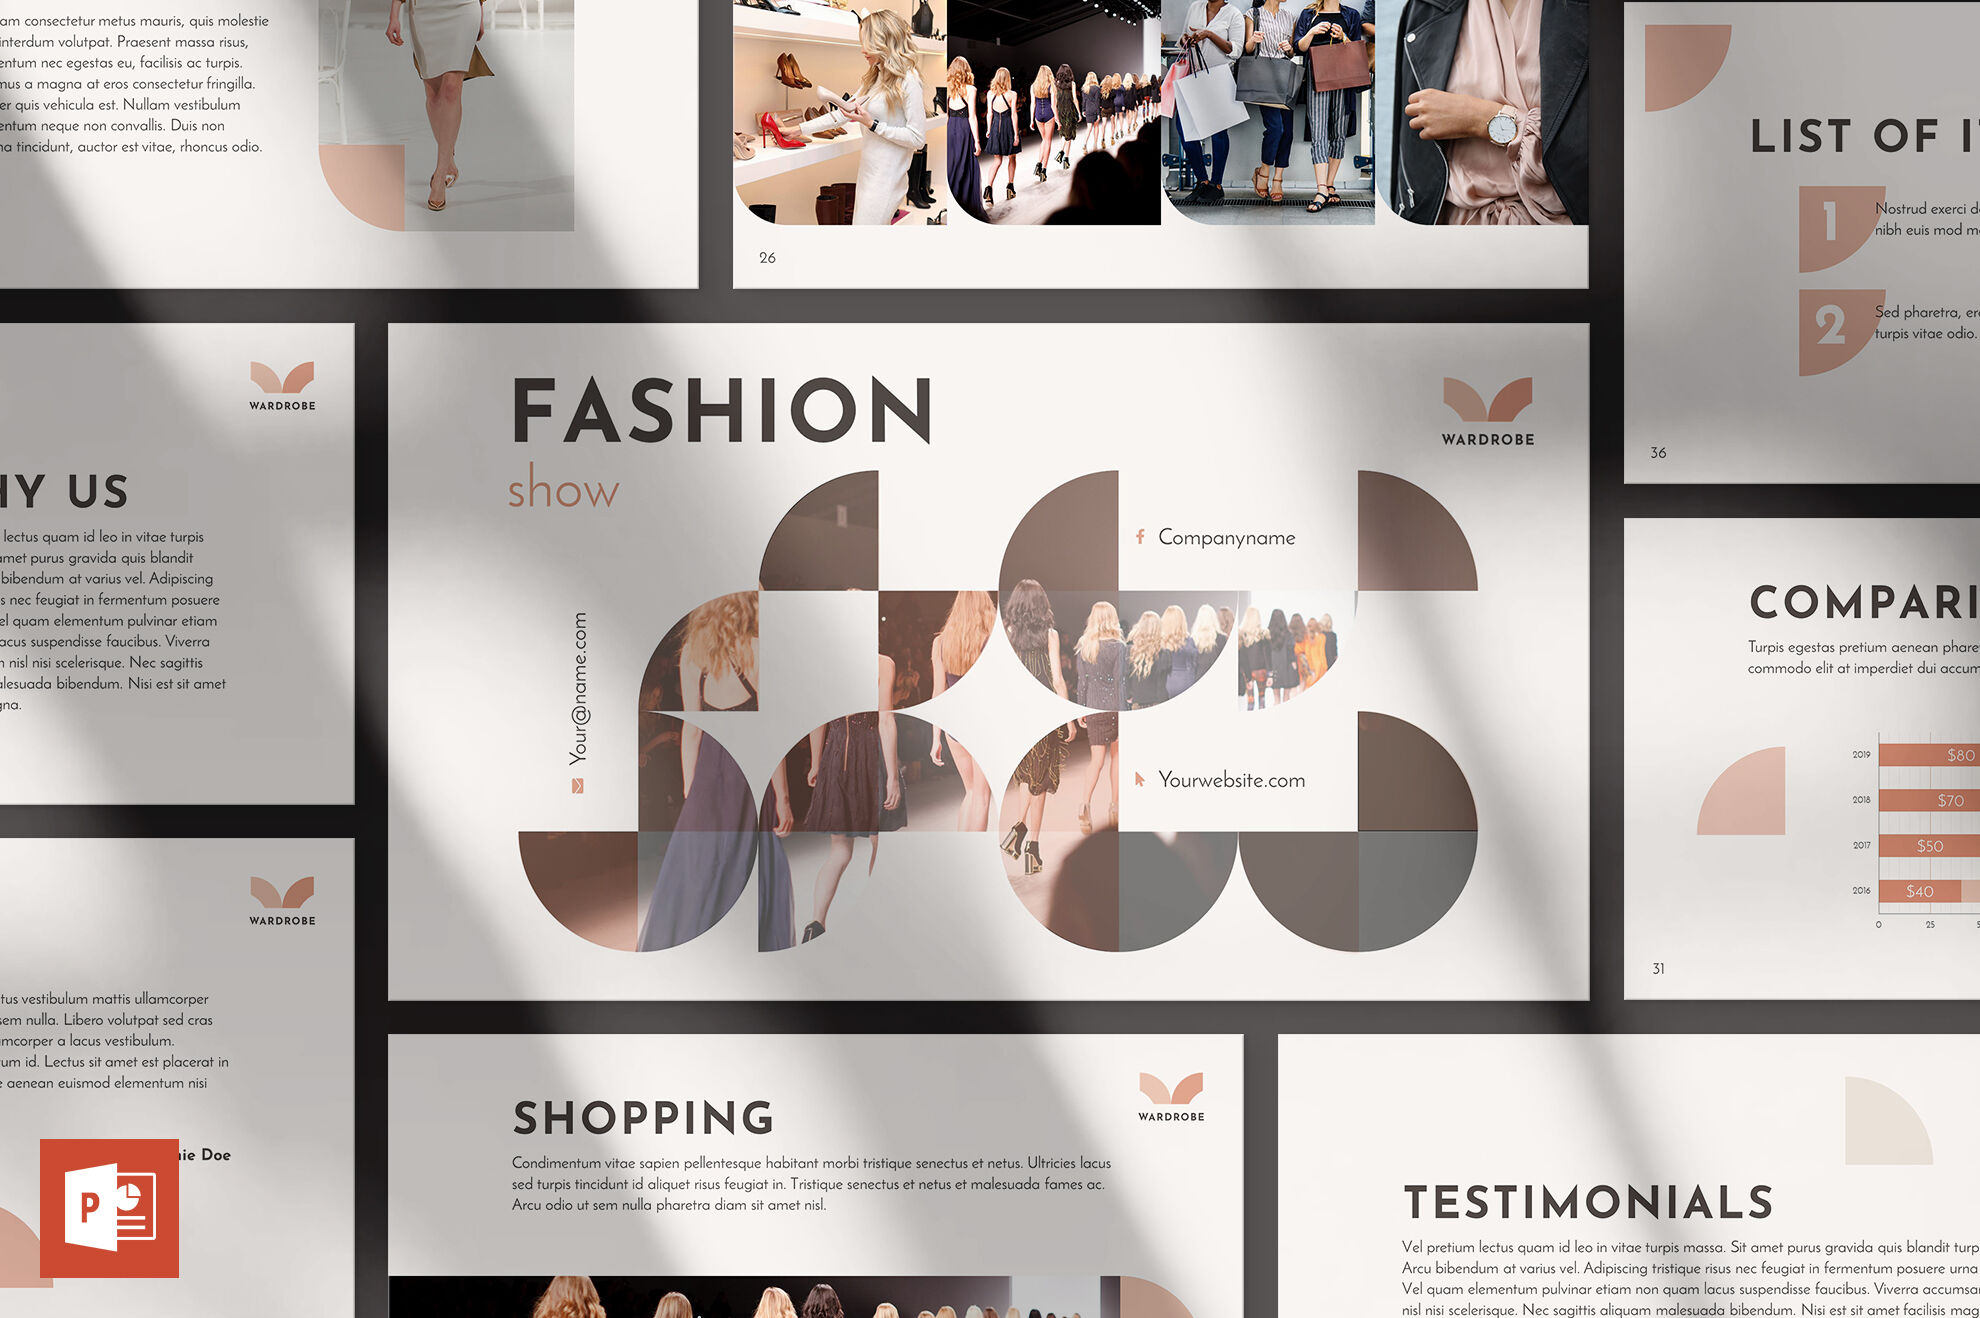 Fashion Show PowerPoint Presentation Template By Amber Graphics ...